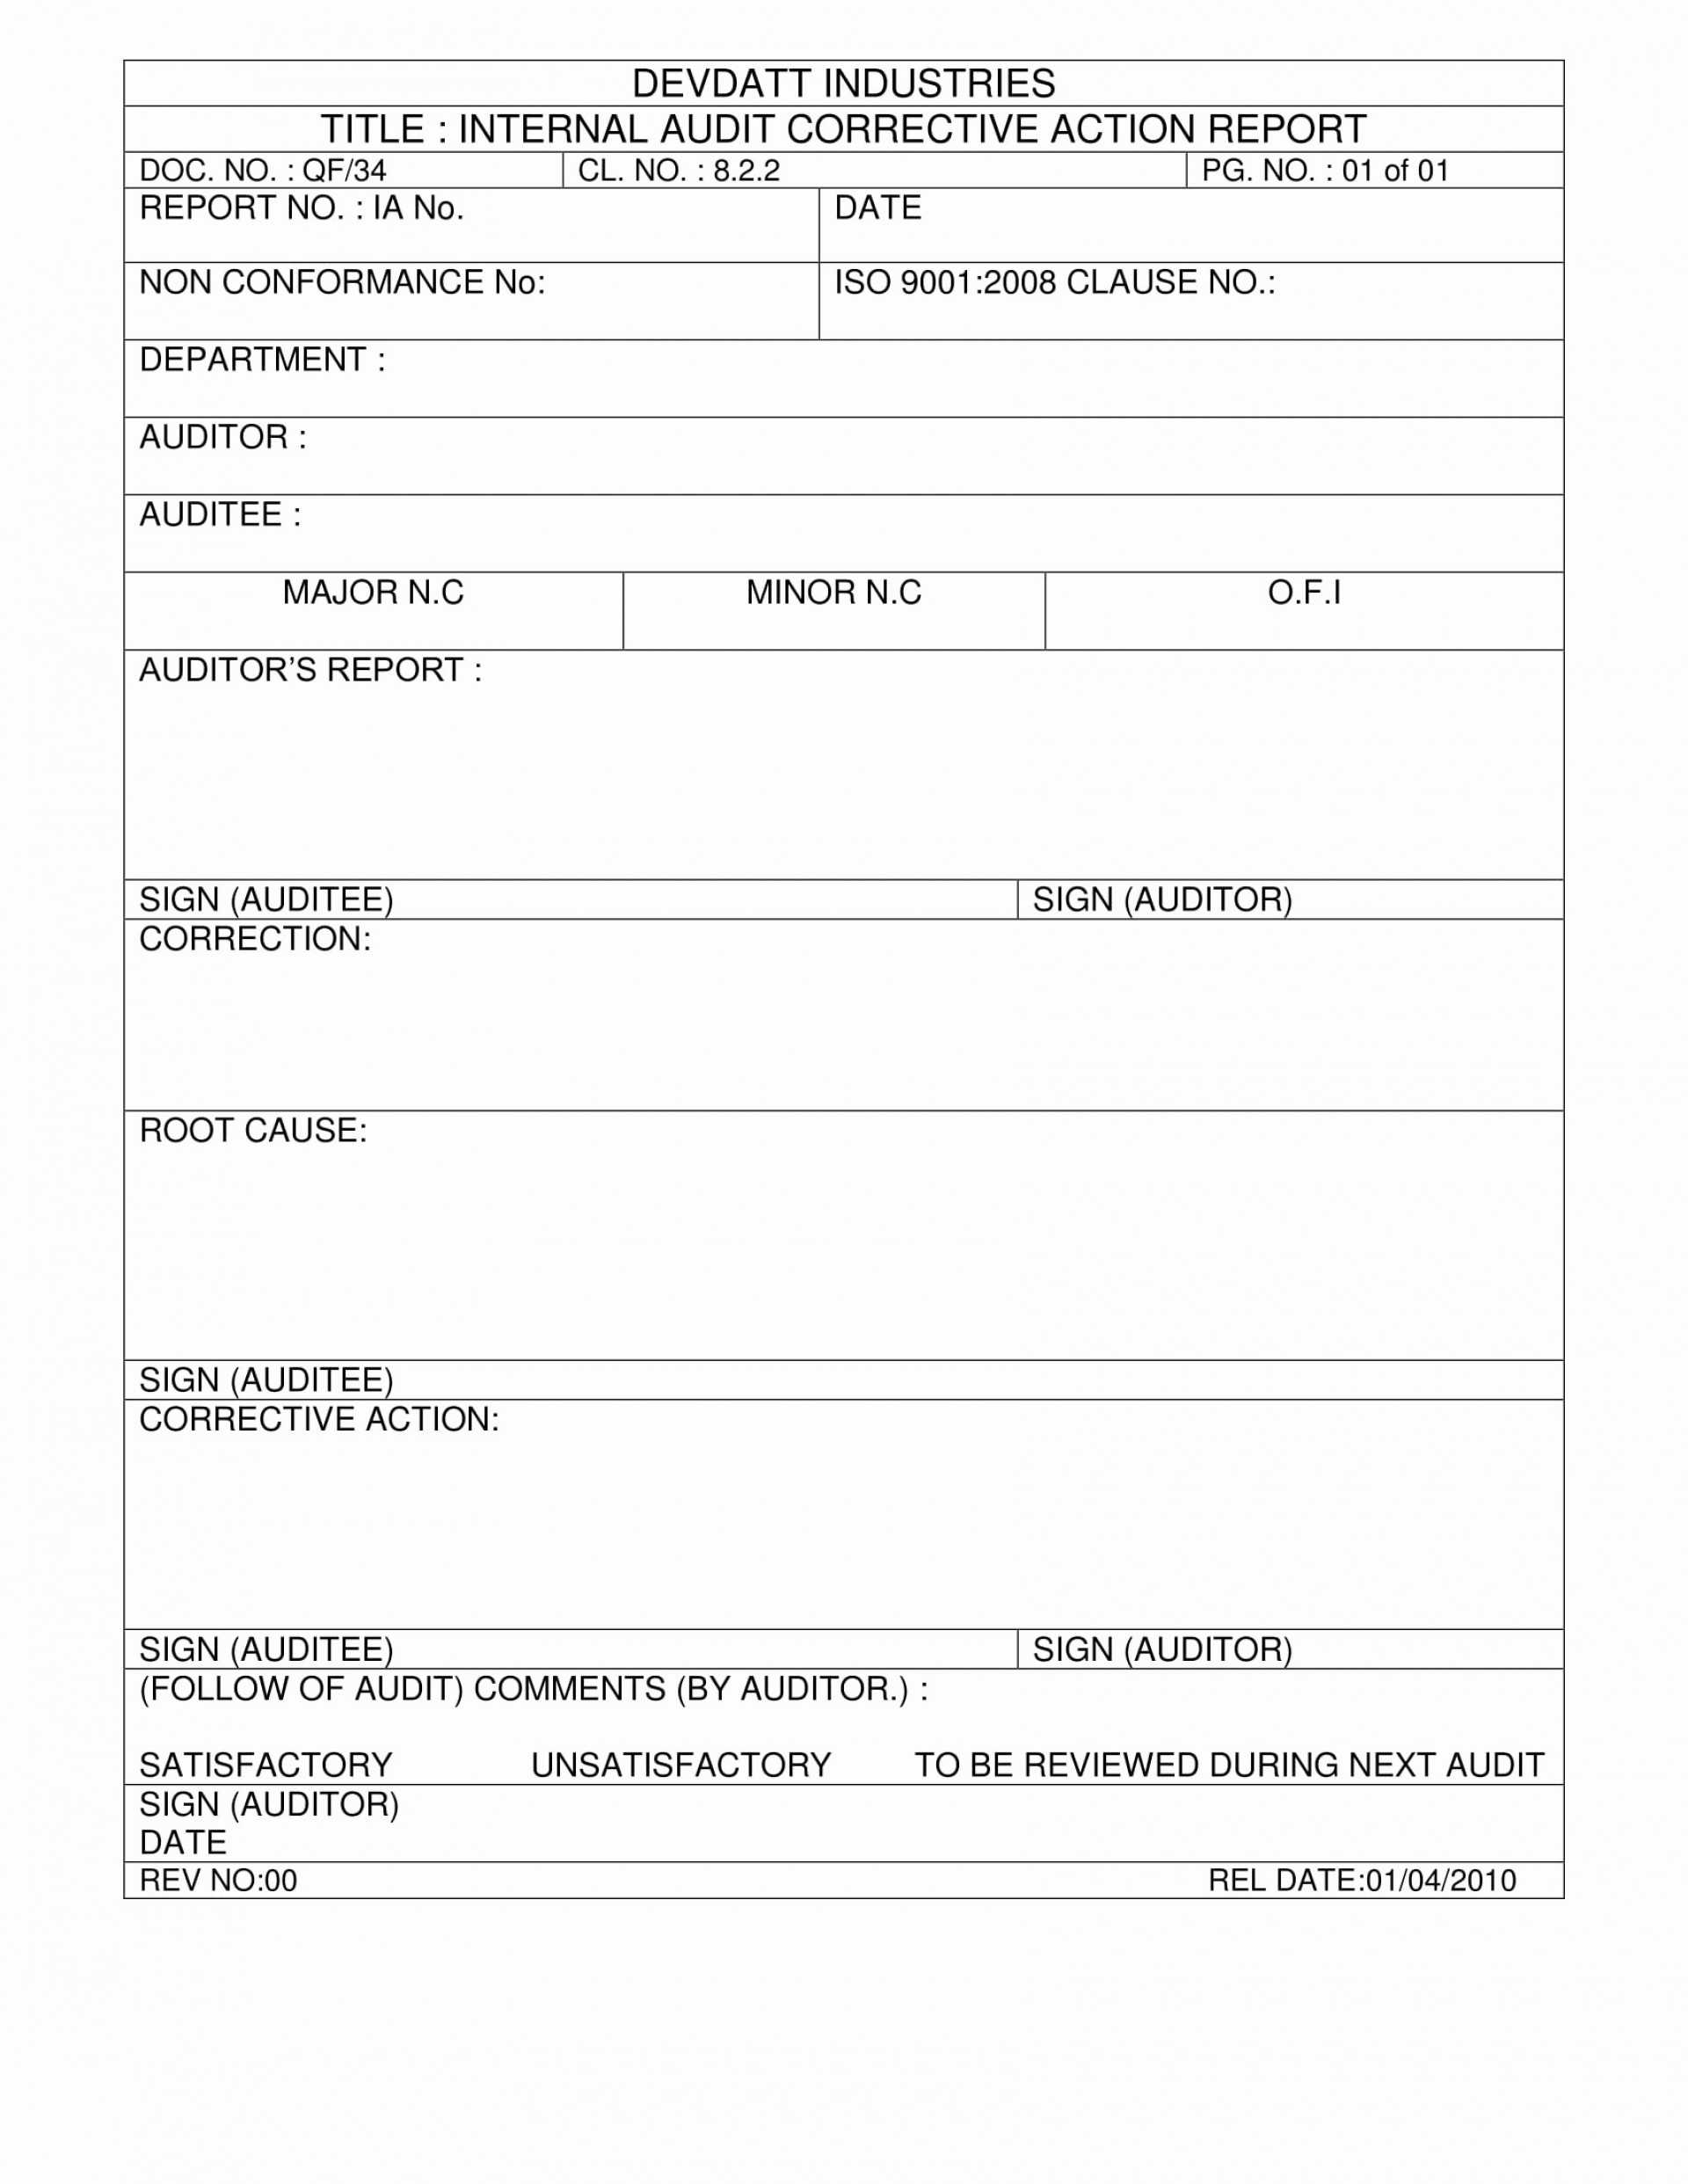 014 Corrective Action Form Template Word Ideas New Non Throughout Non Conformance Report Form Template